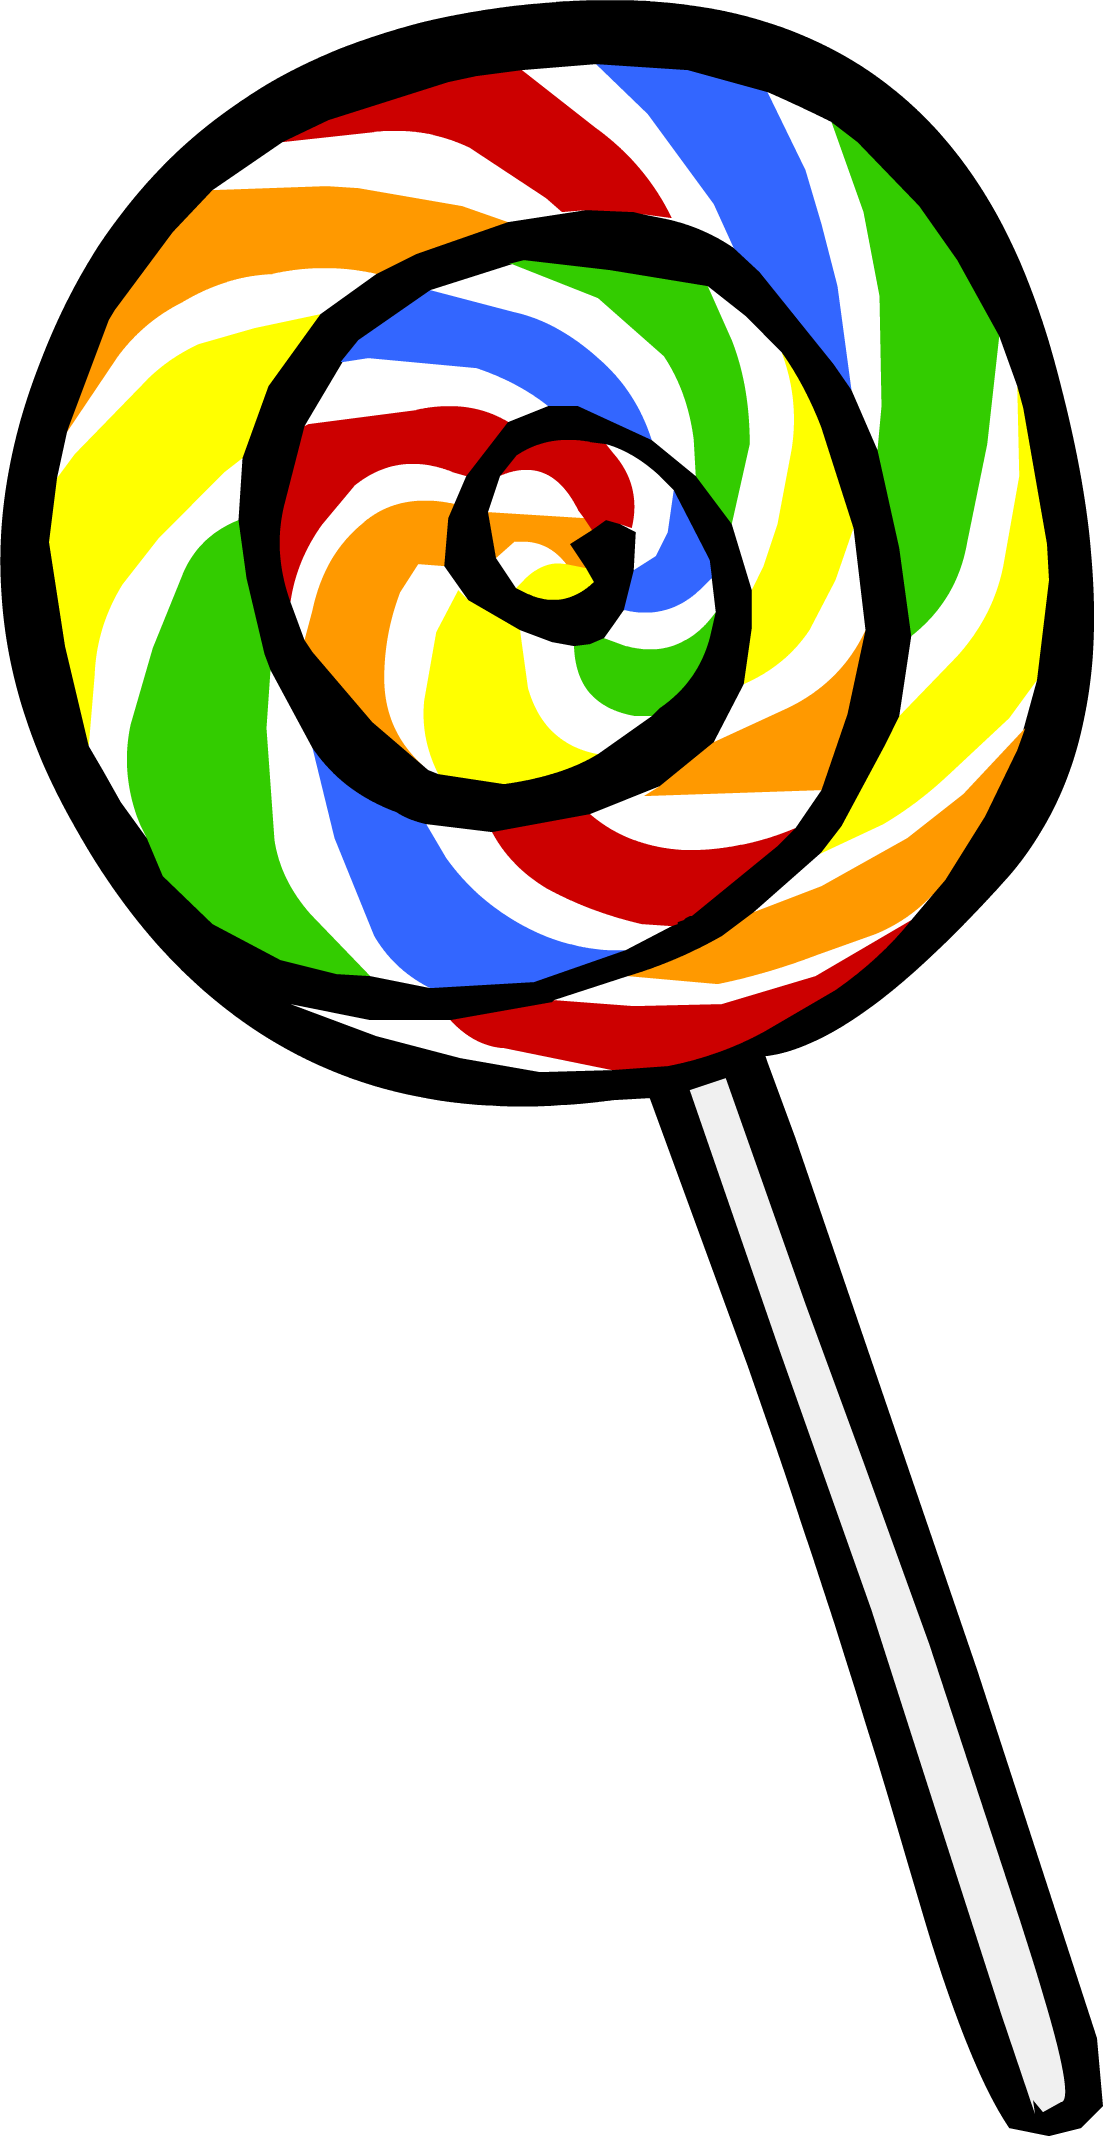 Miscellaneous Sweetish Confection Saccharine Lollipop PNG